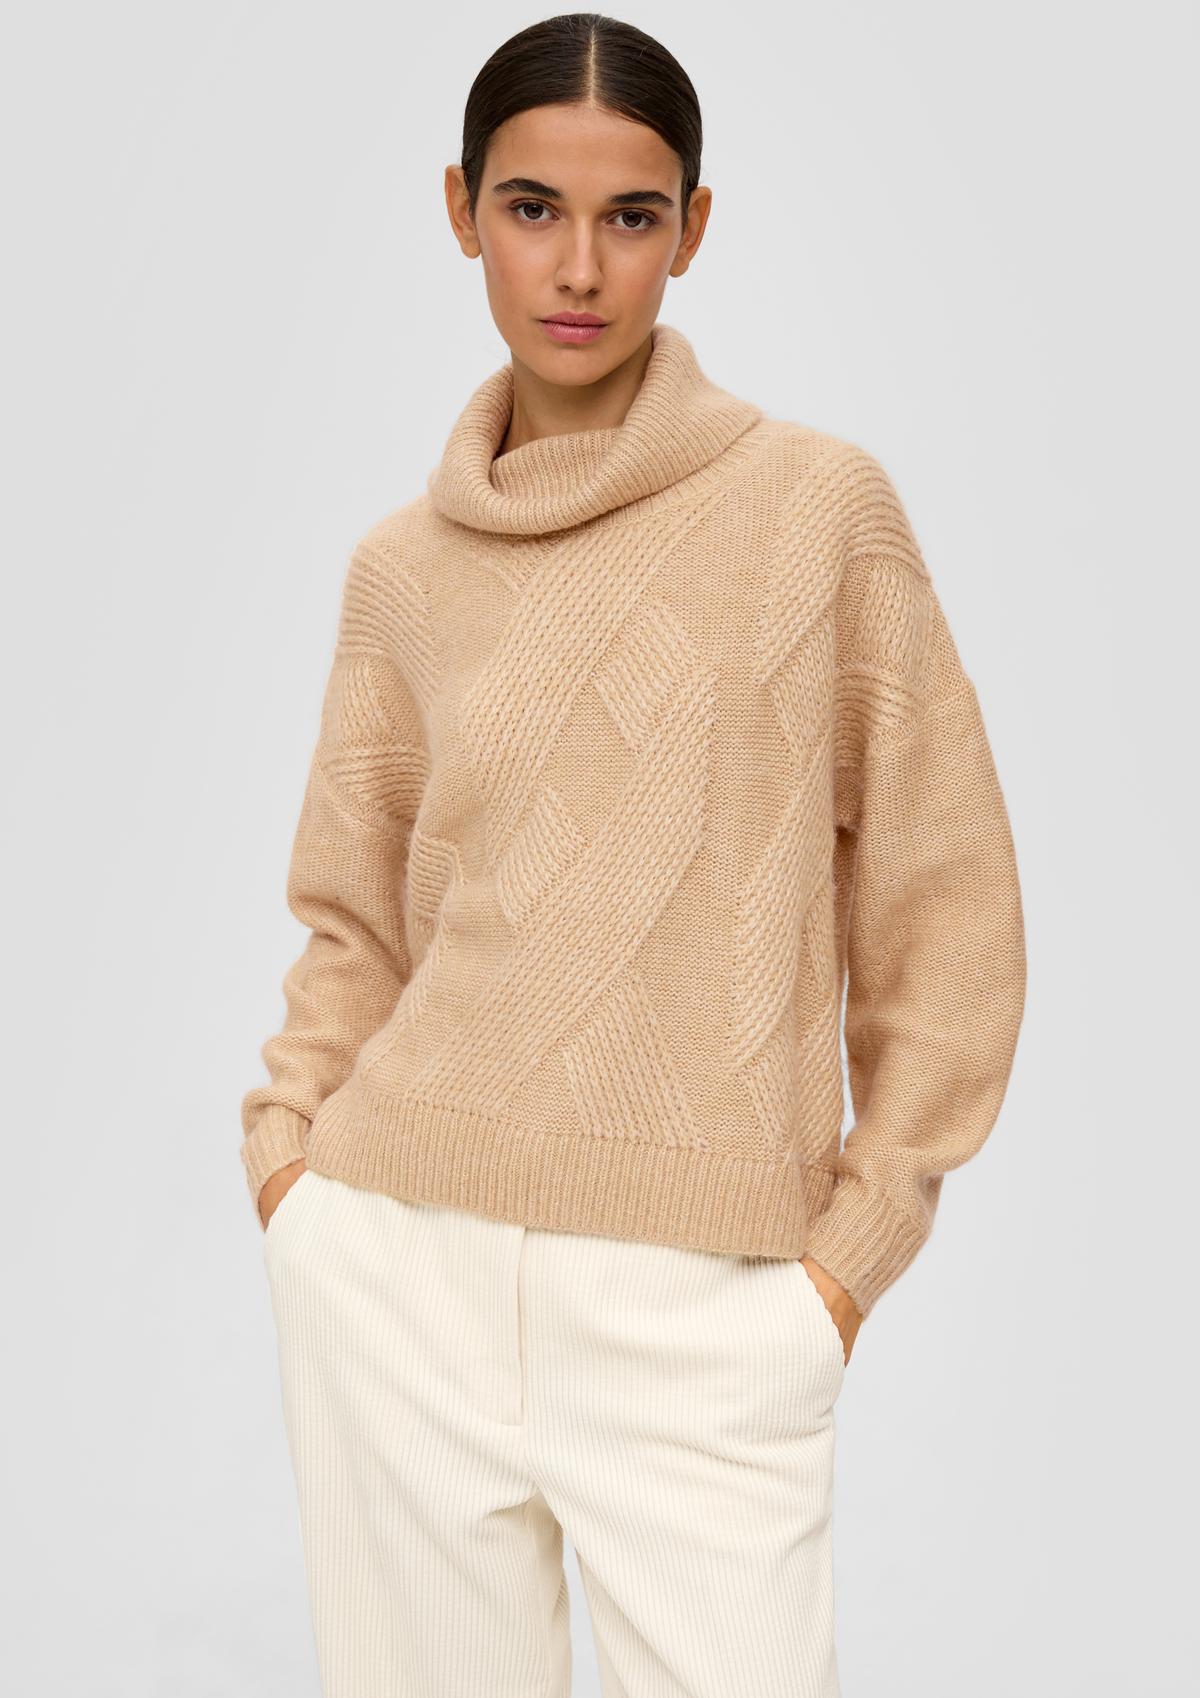 - jumper neck Polo wool blend in a light brown